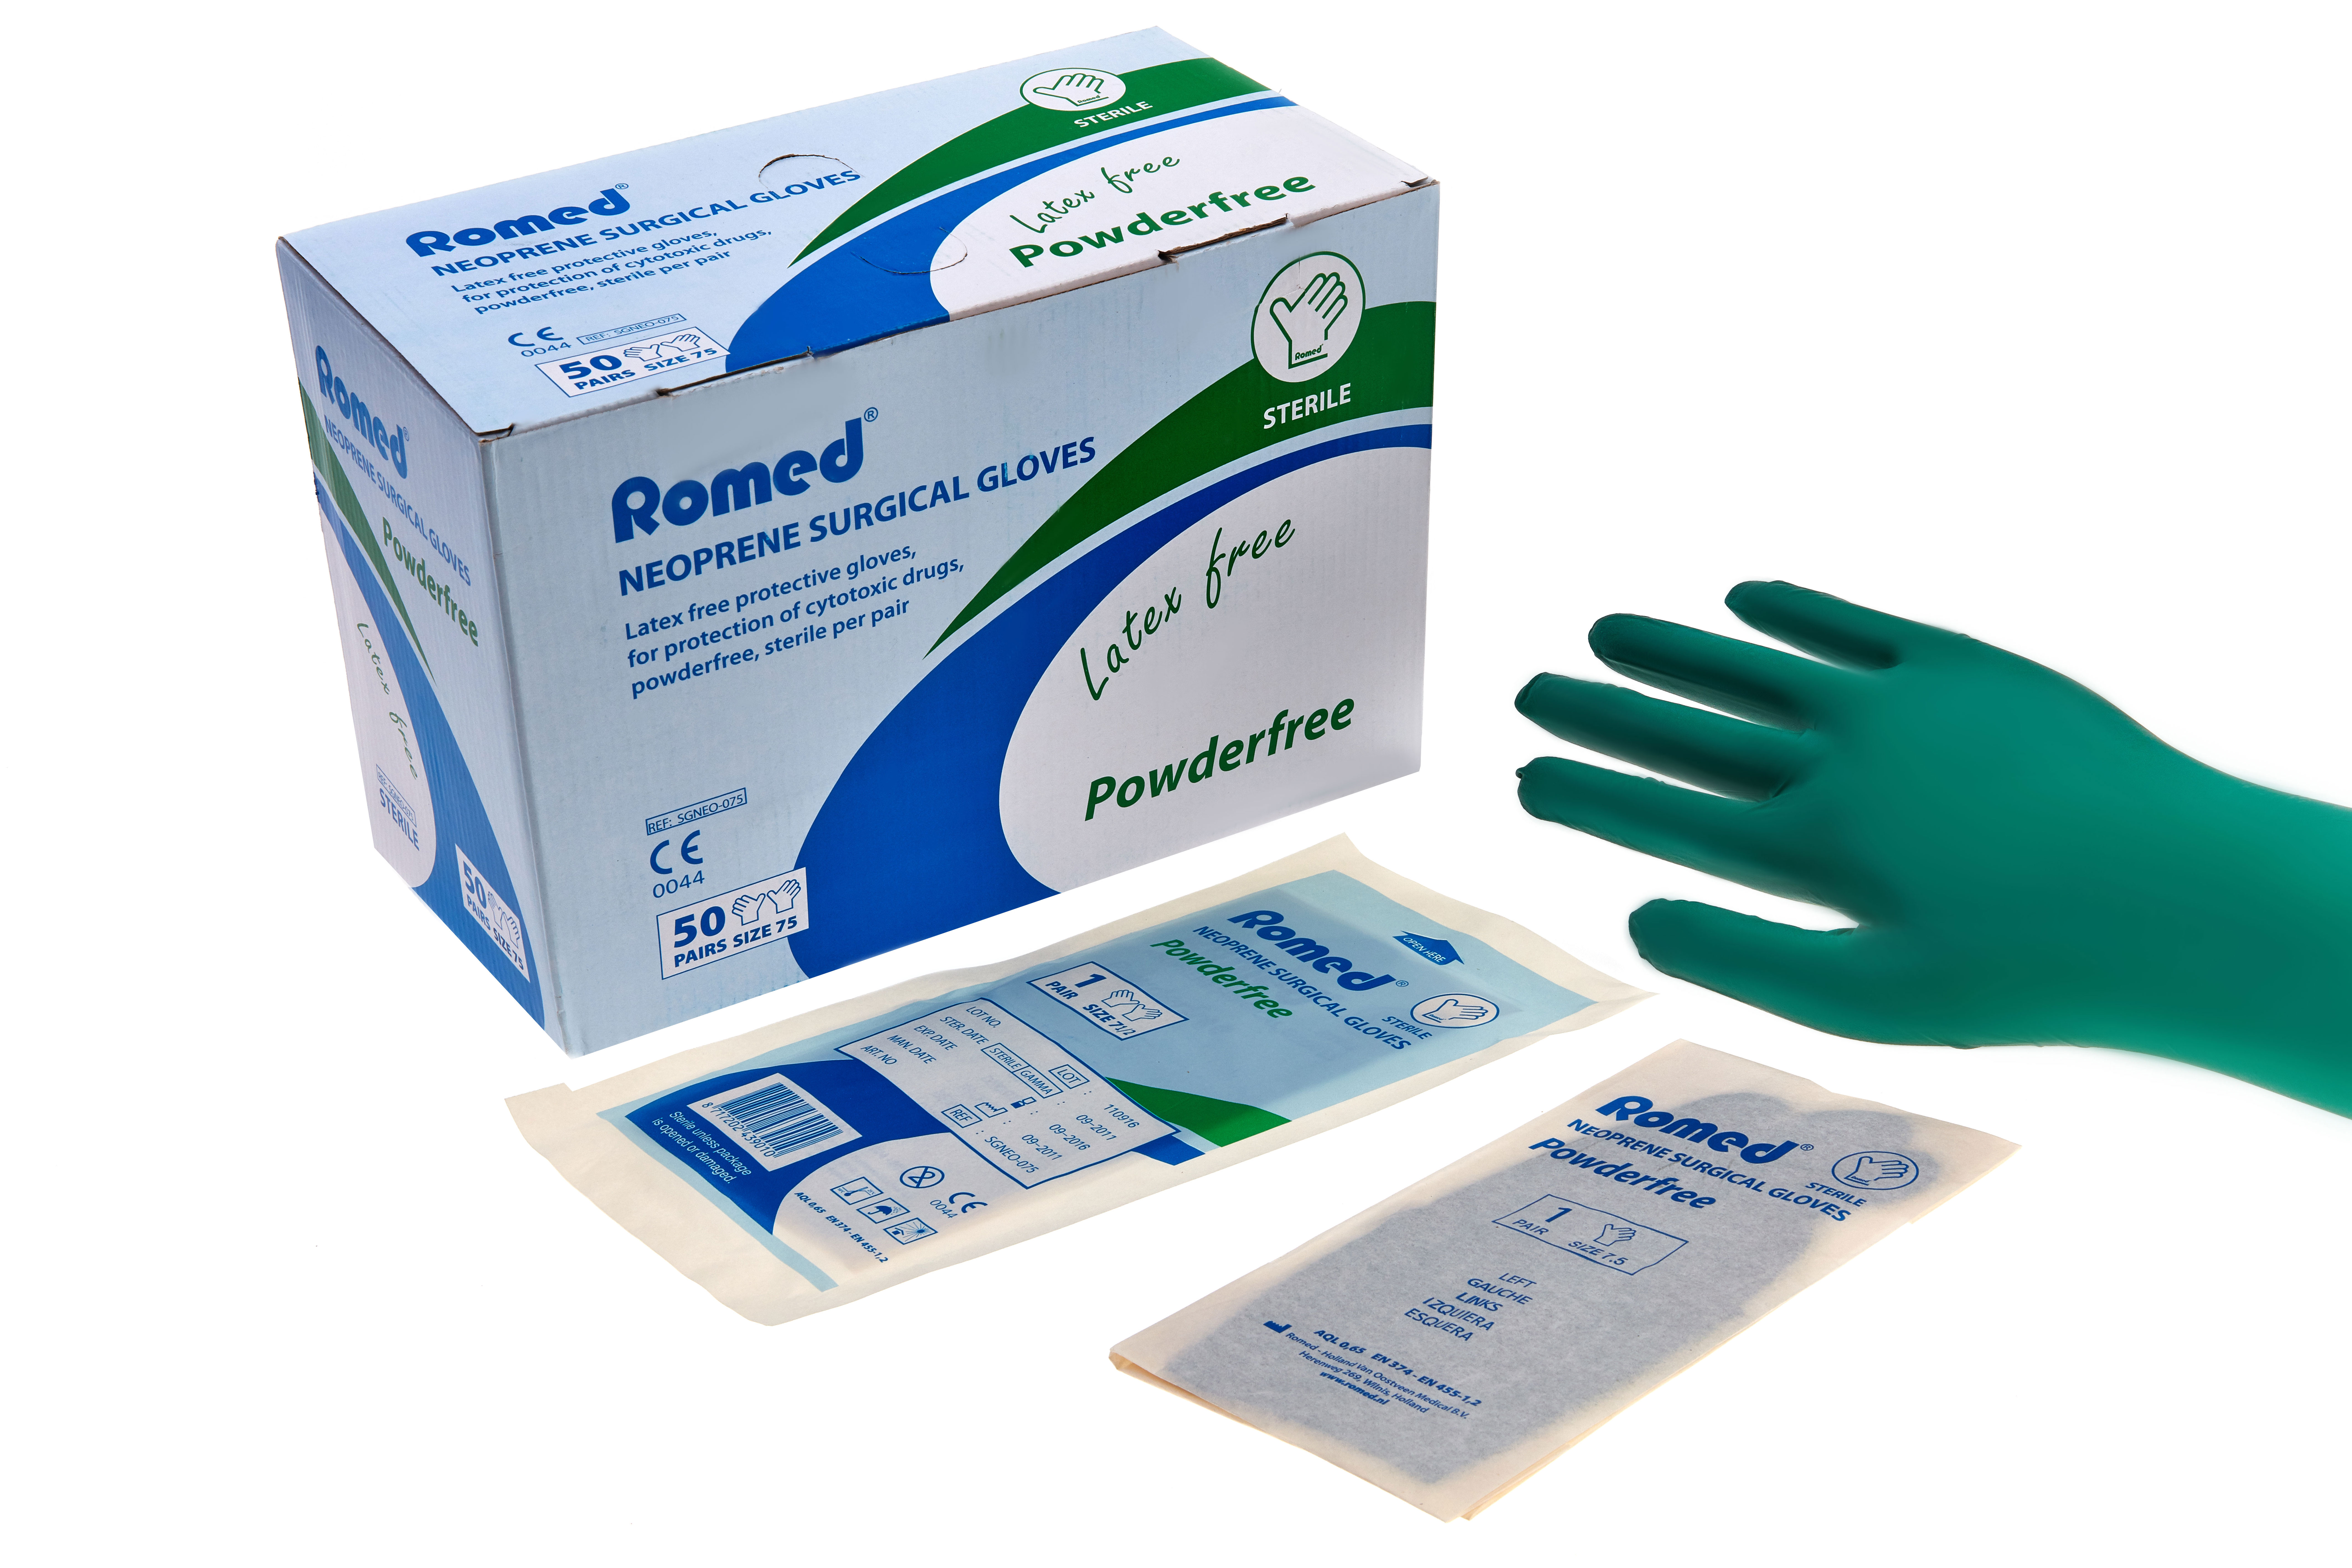 Latex free surgical gloves, powderfree, sterile (on request)